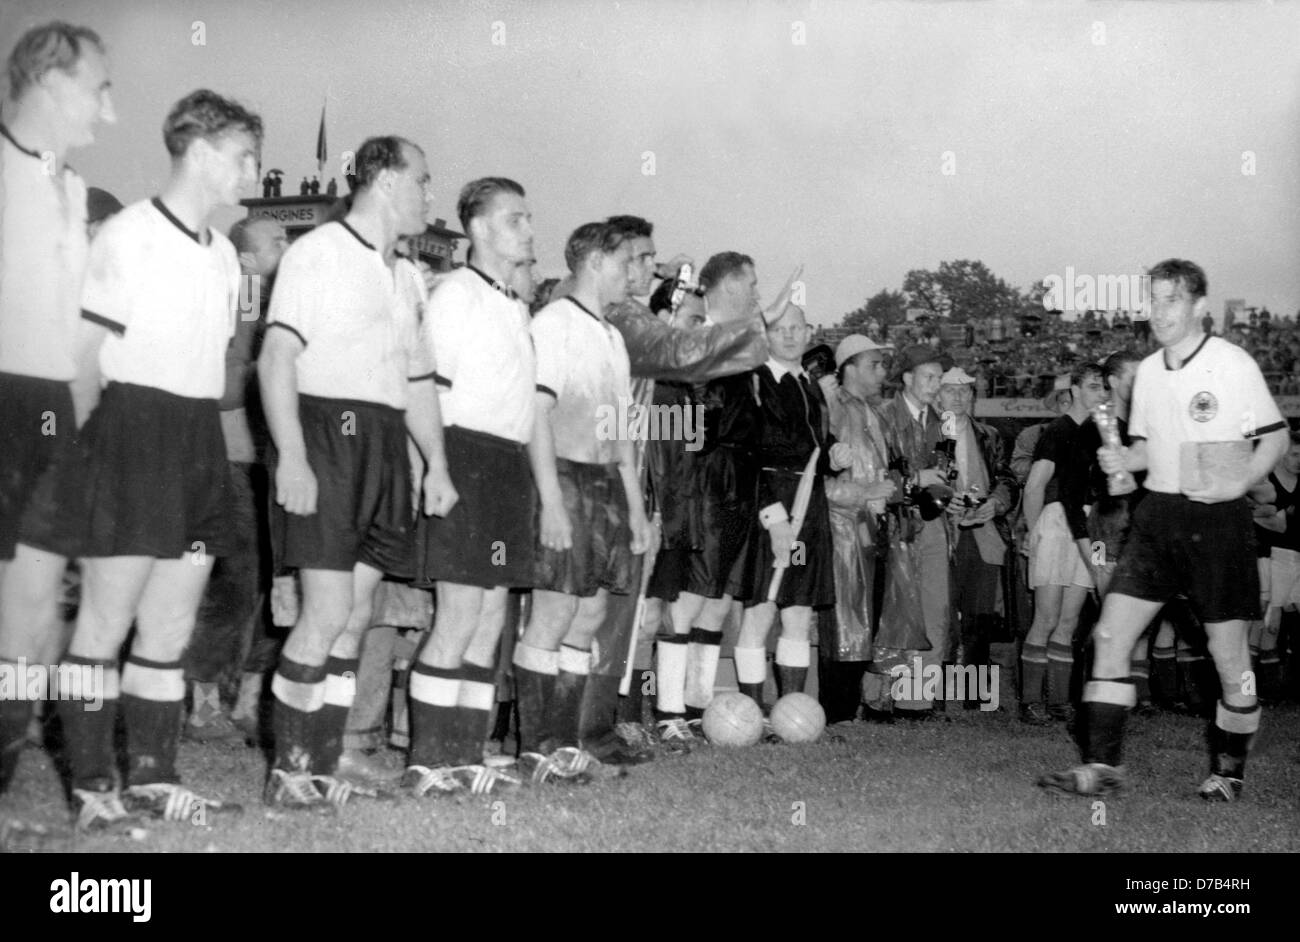 After beating Hungary 3:2 in the 1954 FIFA Word Cup final at Bern's Wankdorf stadium on the 4th of July in 1954, German team captain Fritz Walter (r) is proudly holding the conquered Jules-Rimet-Cup in his hand. In front of him a line-up of the German team for the victory ceremony. The picture shows (l-r) Jupp Posipal, Hans Schäfer, Werner Kohlmeyer, Karl Mai and Max Morlock. Stock Photo